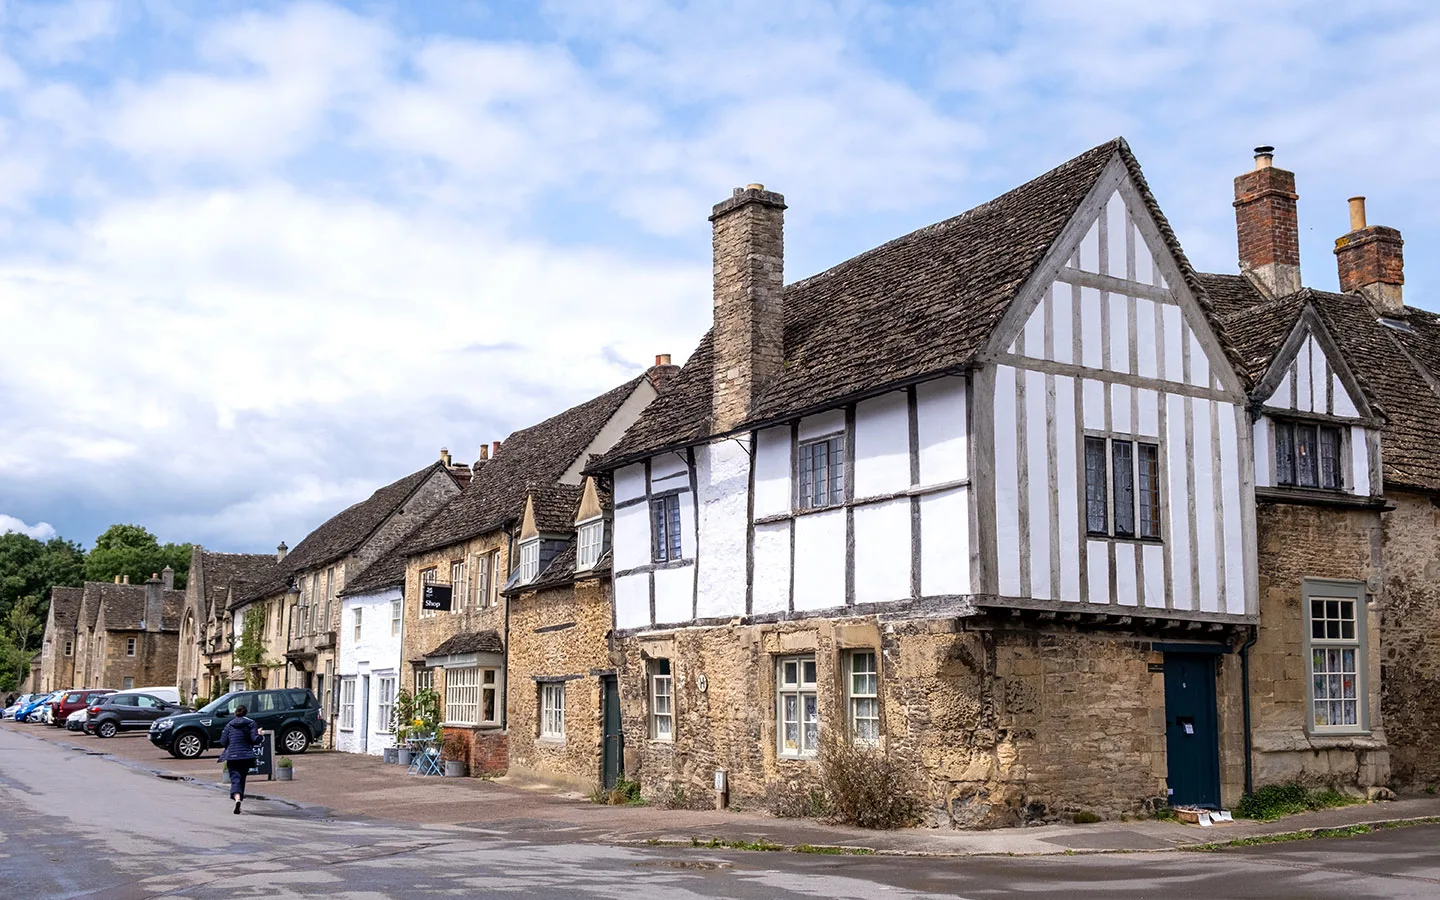 Half-timbered building in Lacock village